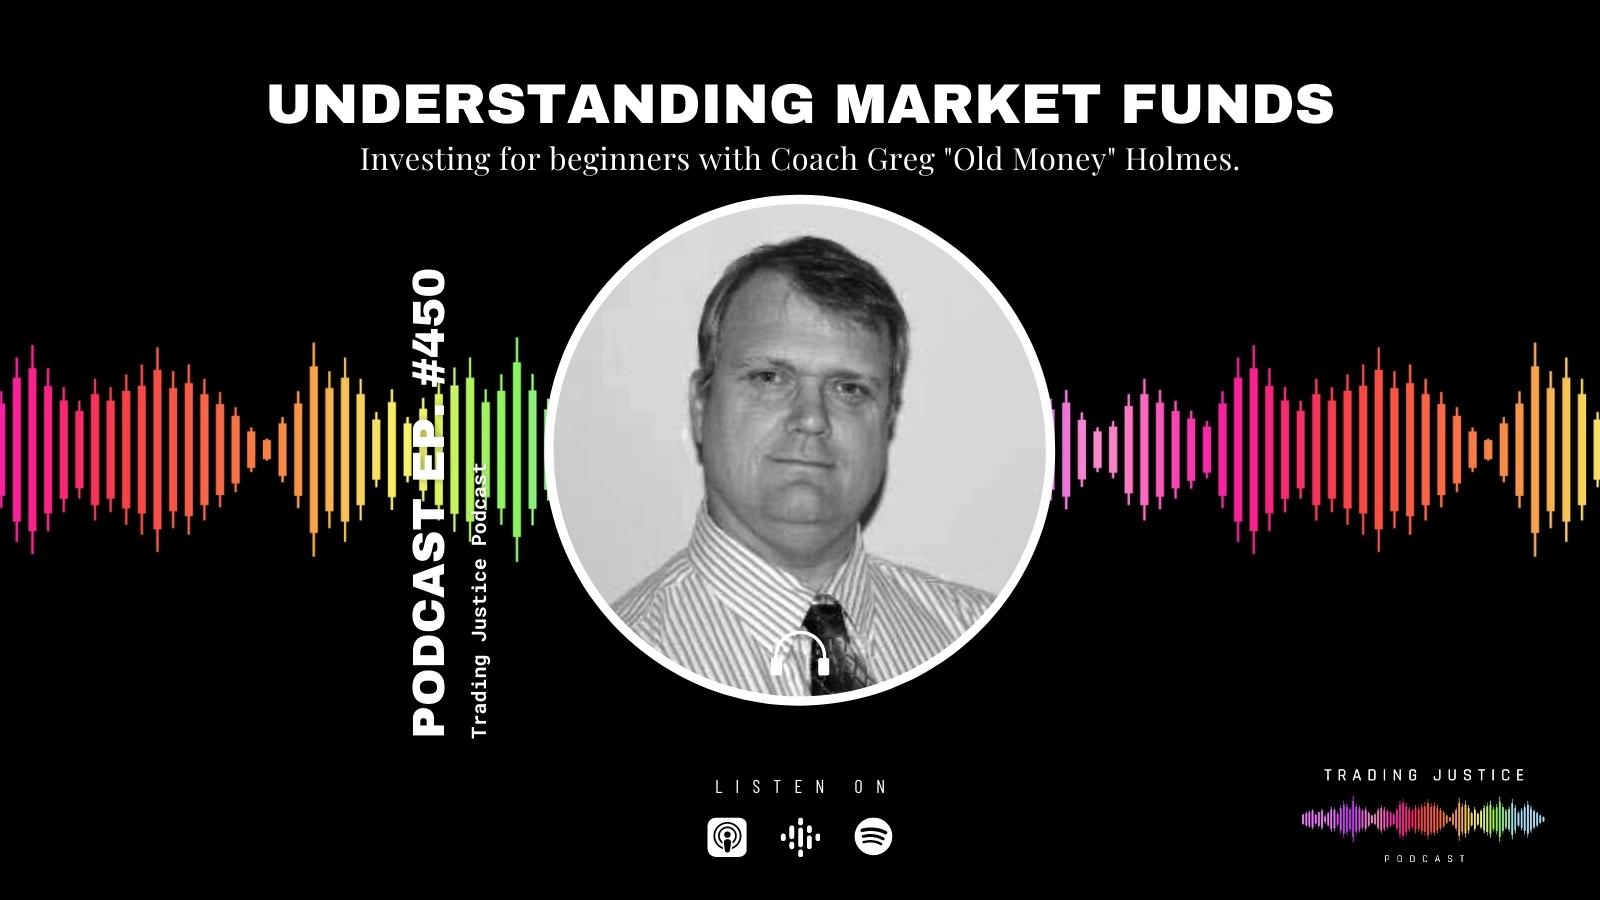 Trading Justice 450: Understanding Market Funds with Coach Greg Holmes